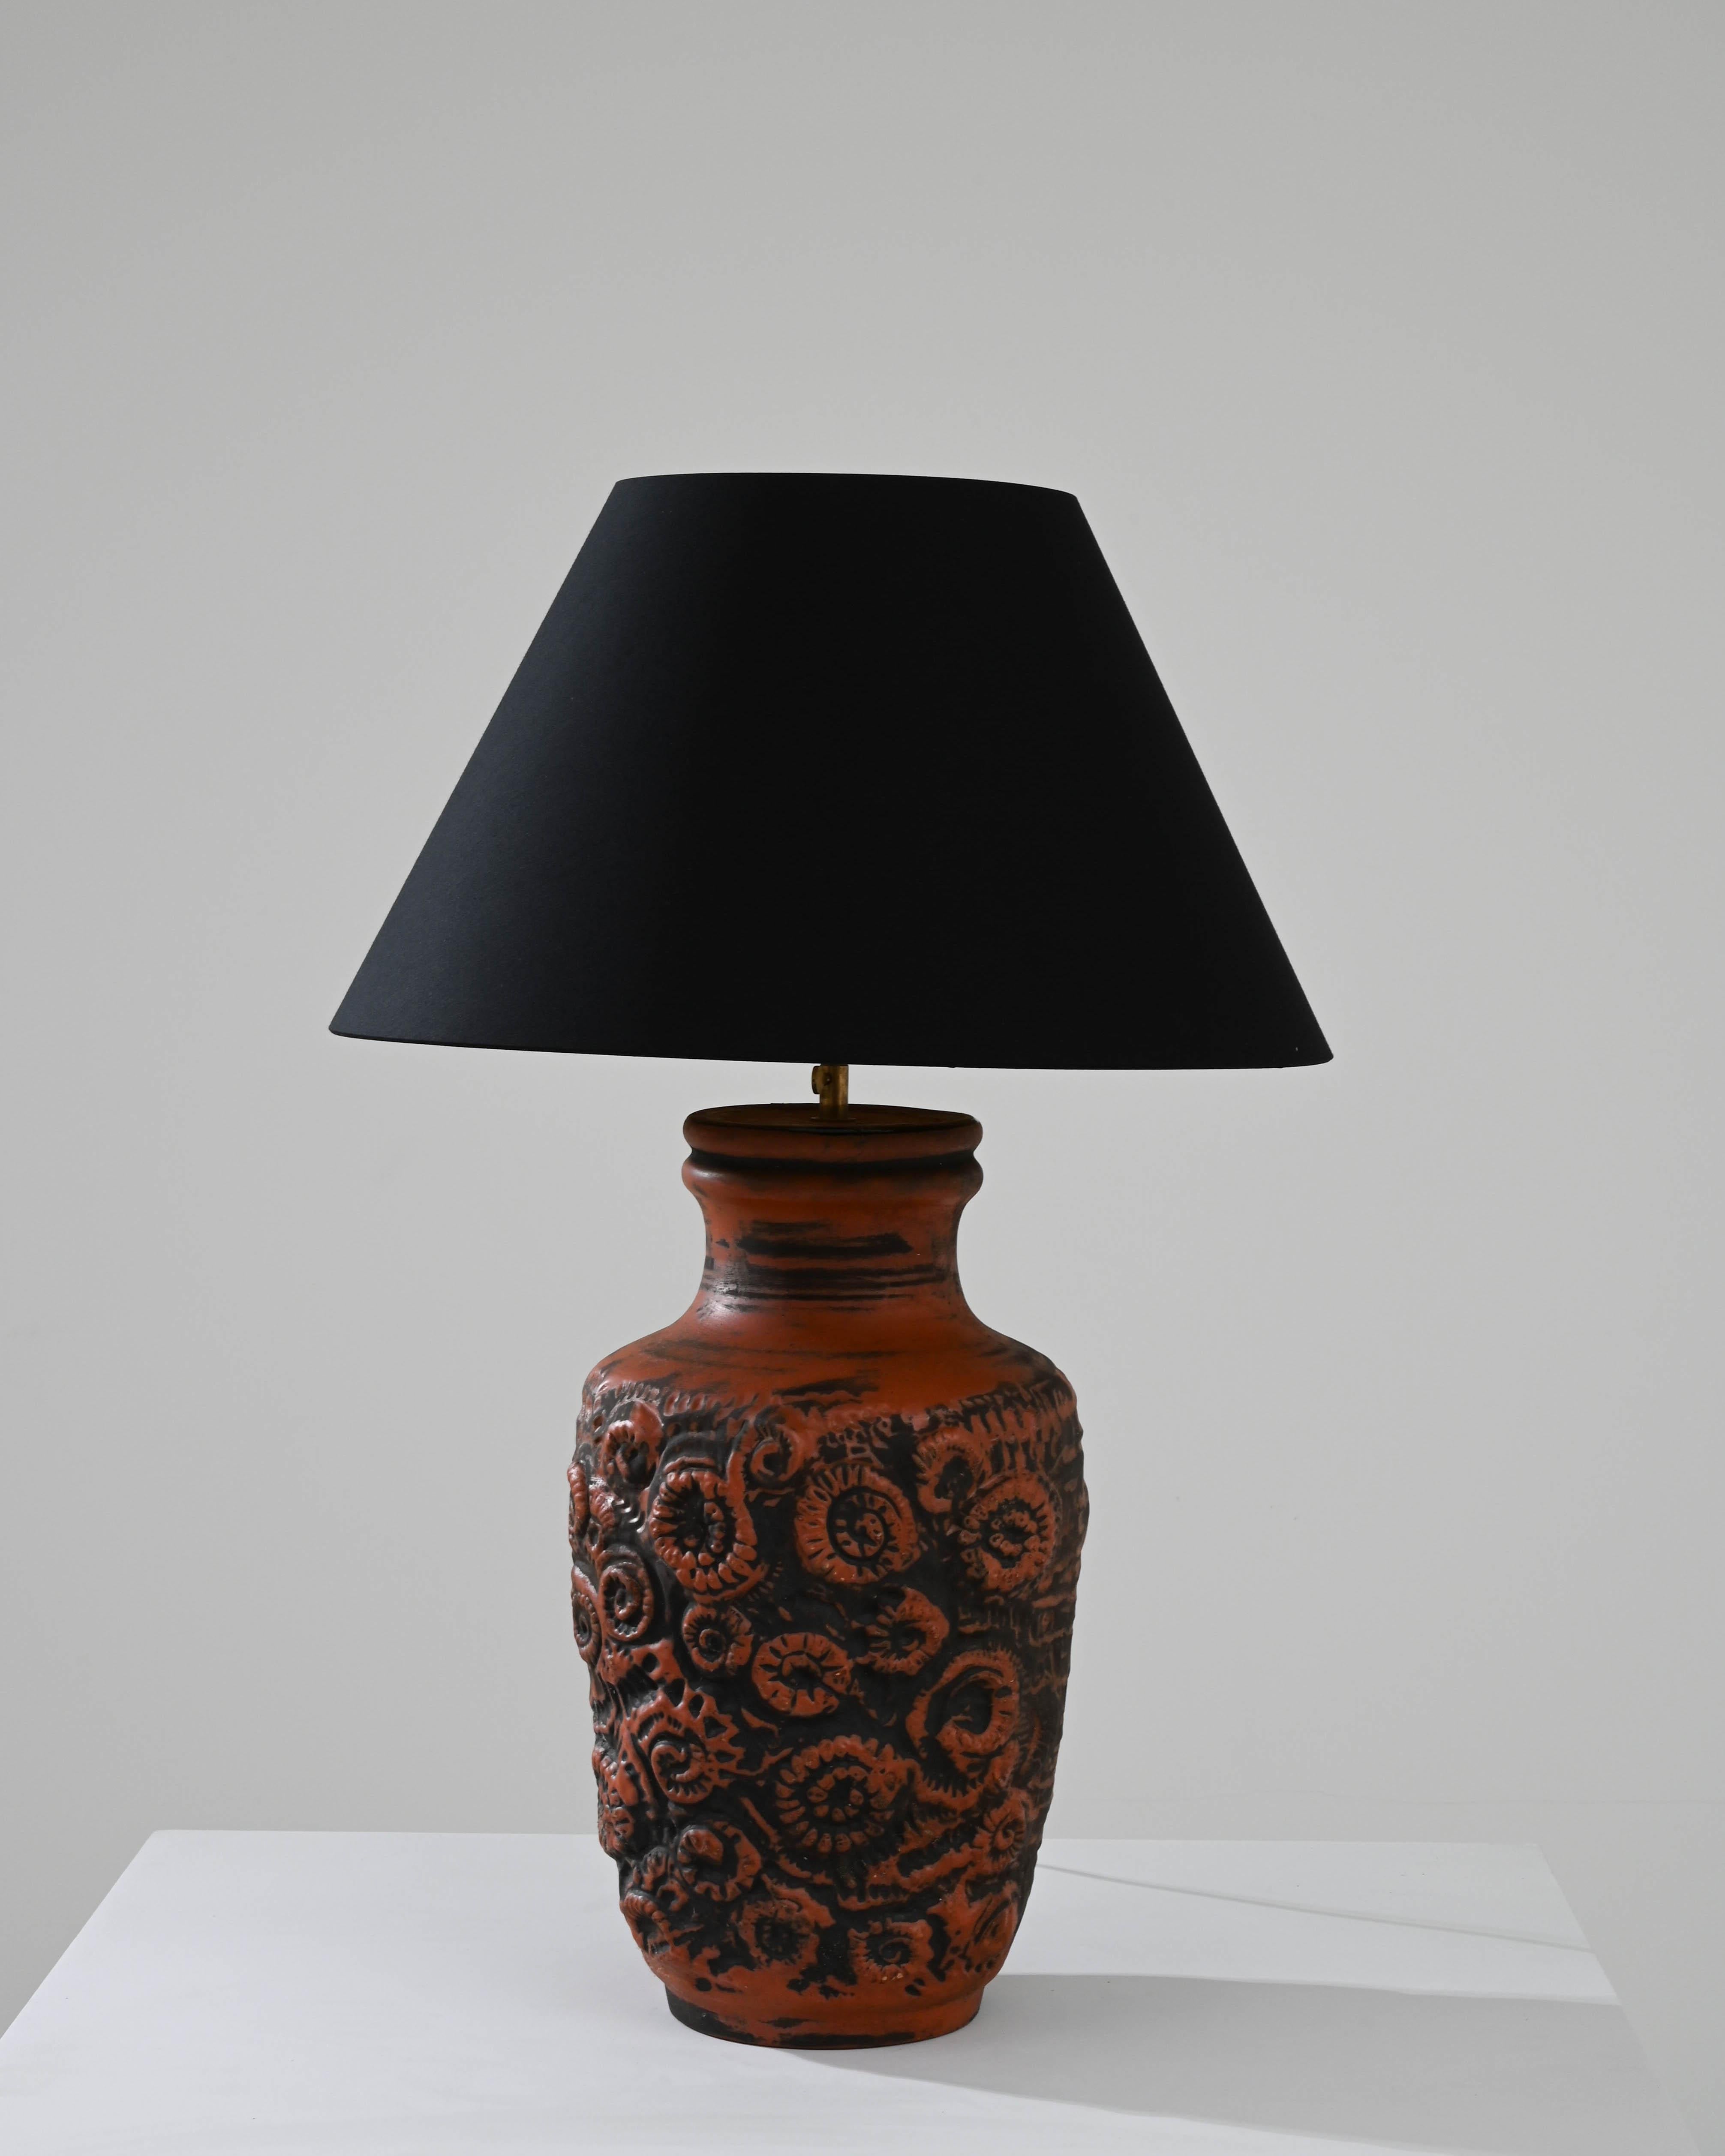 1960s German Ceramic Table Lamp In Good Condition For Sale In High Point, NC